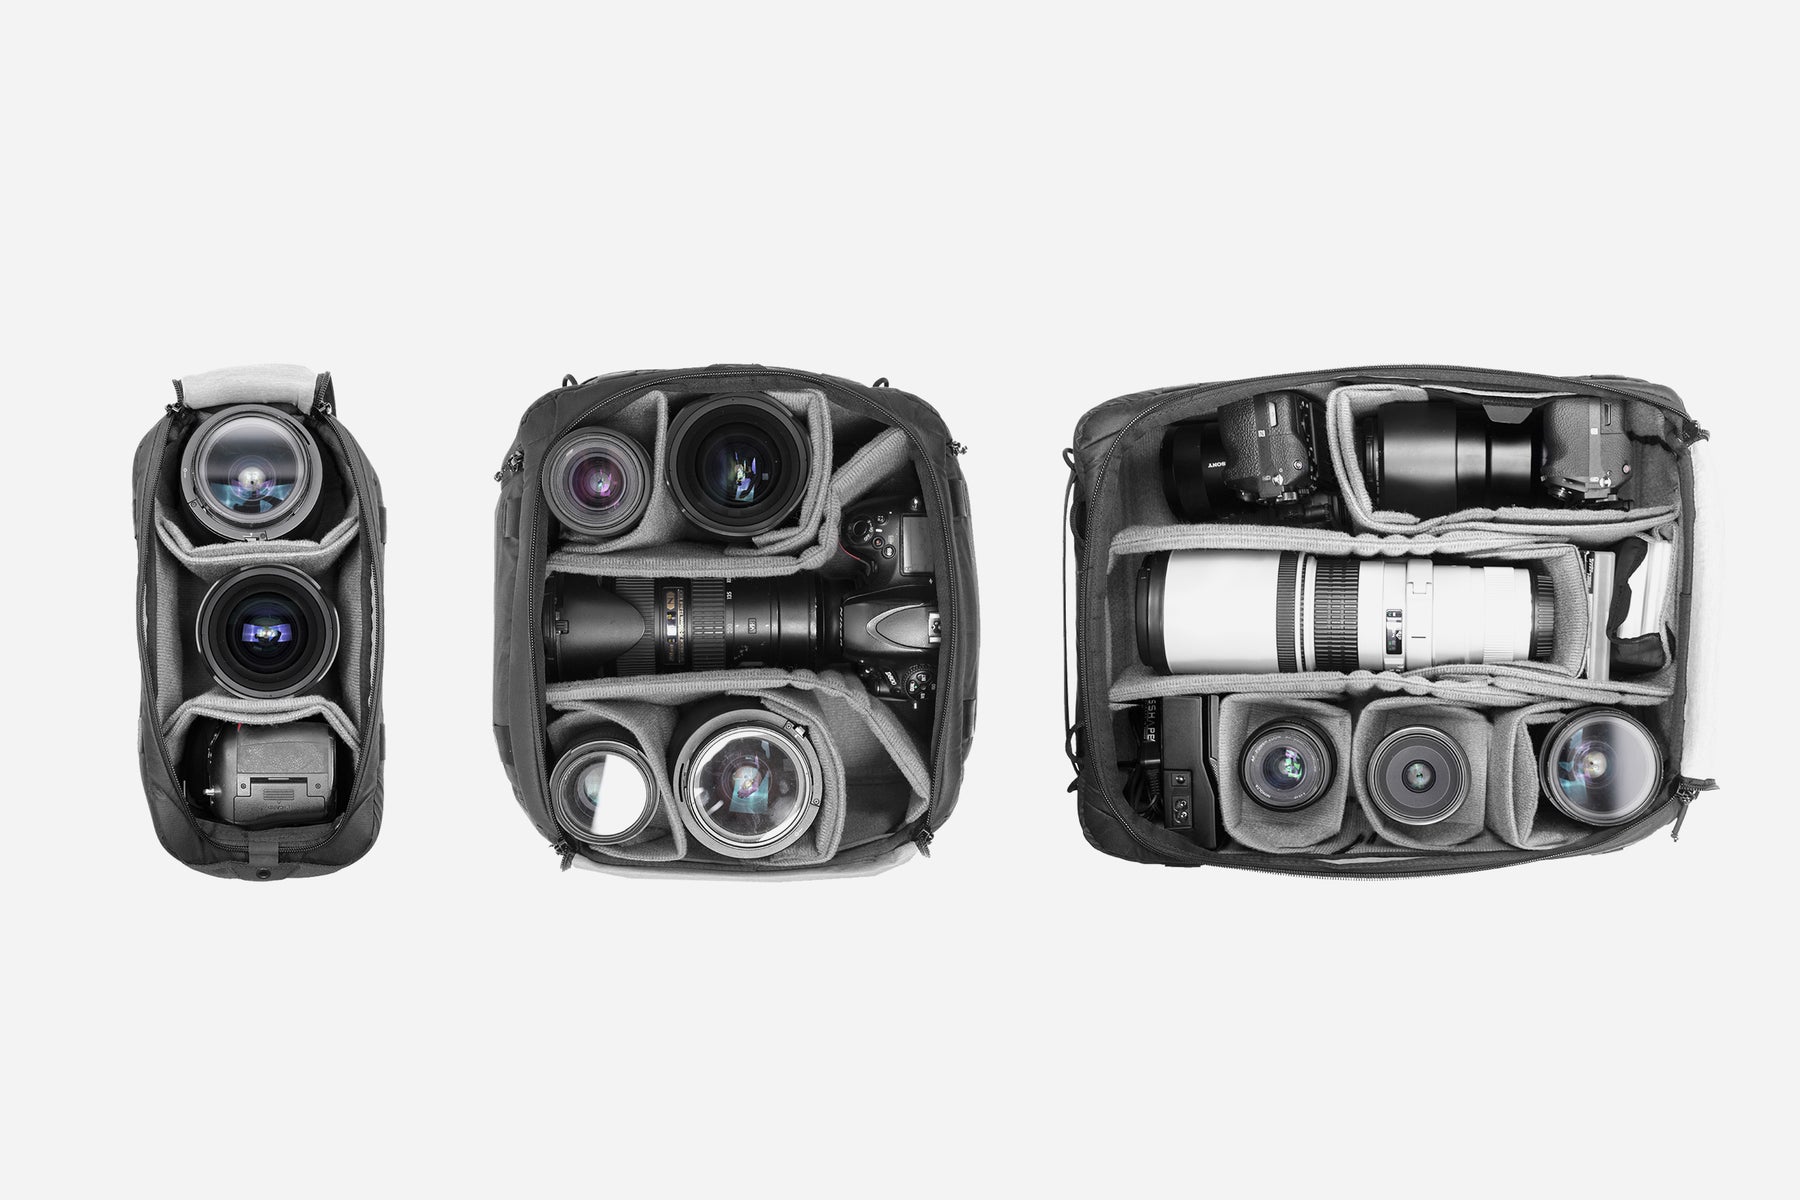 The Peak Design Camera Cubes, Organise & Protect Your Camera Gear